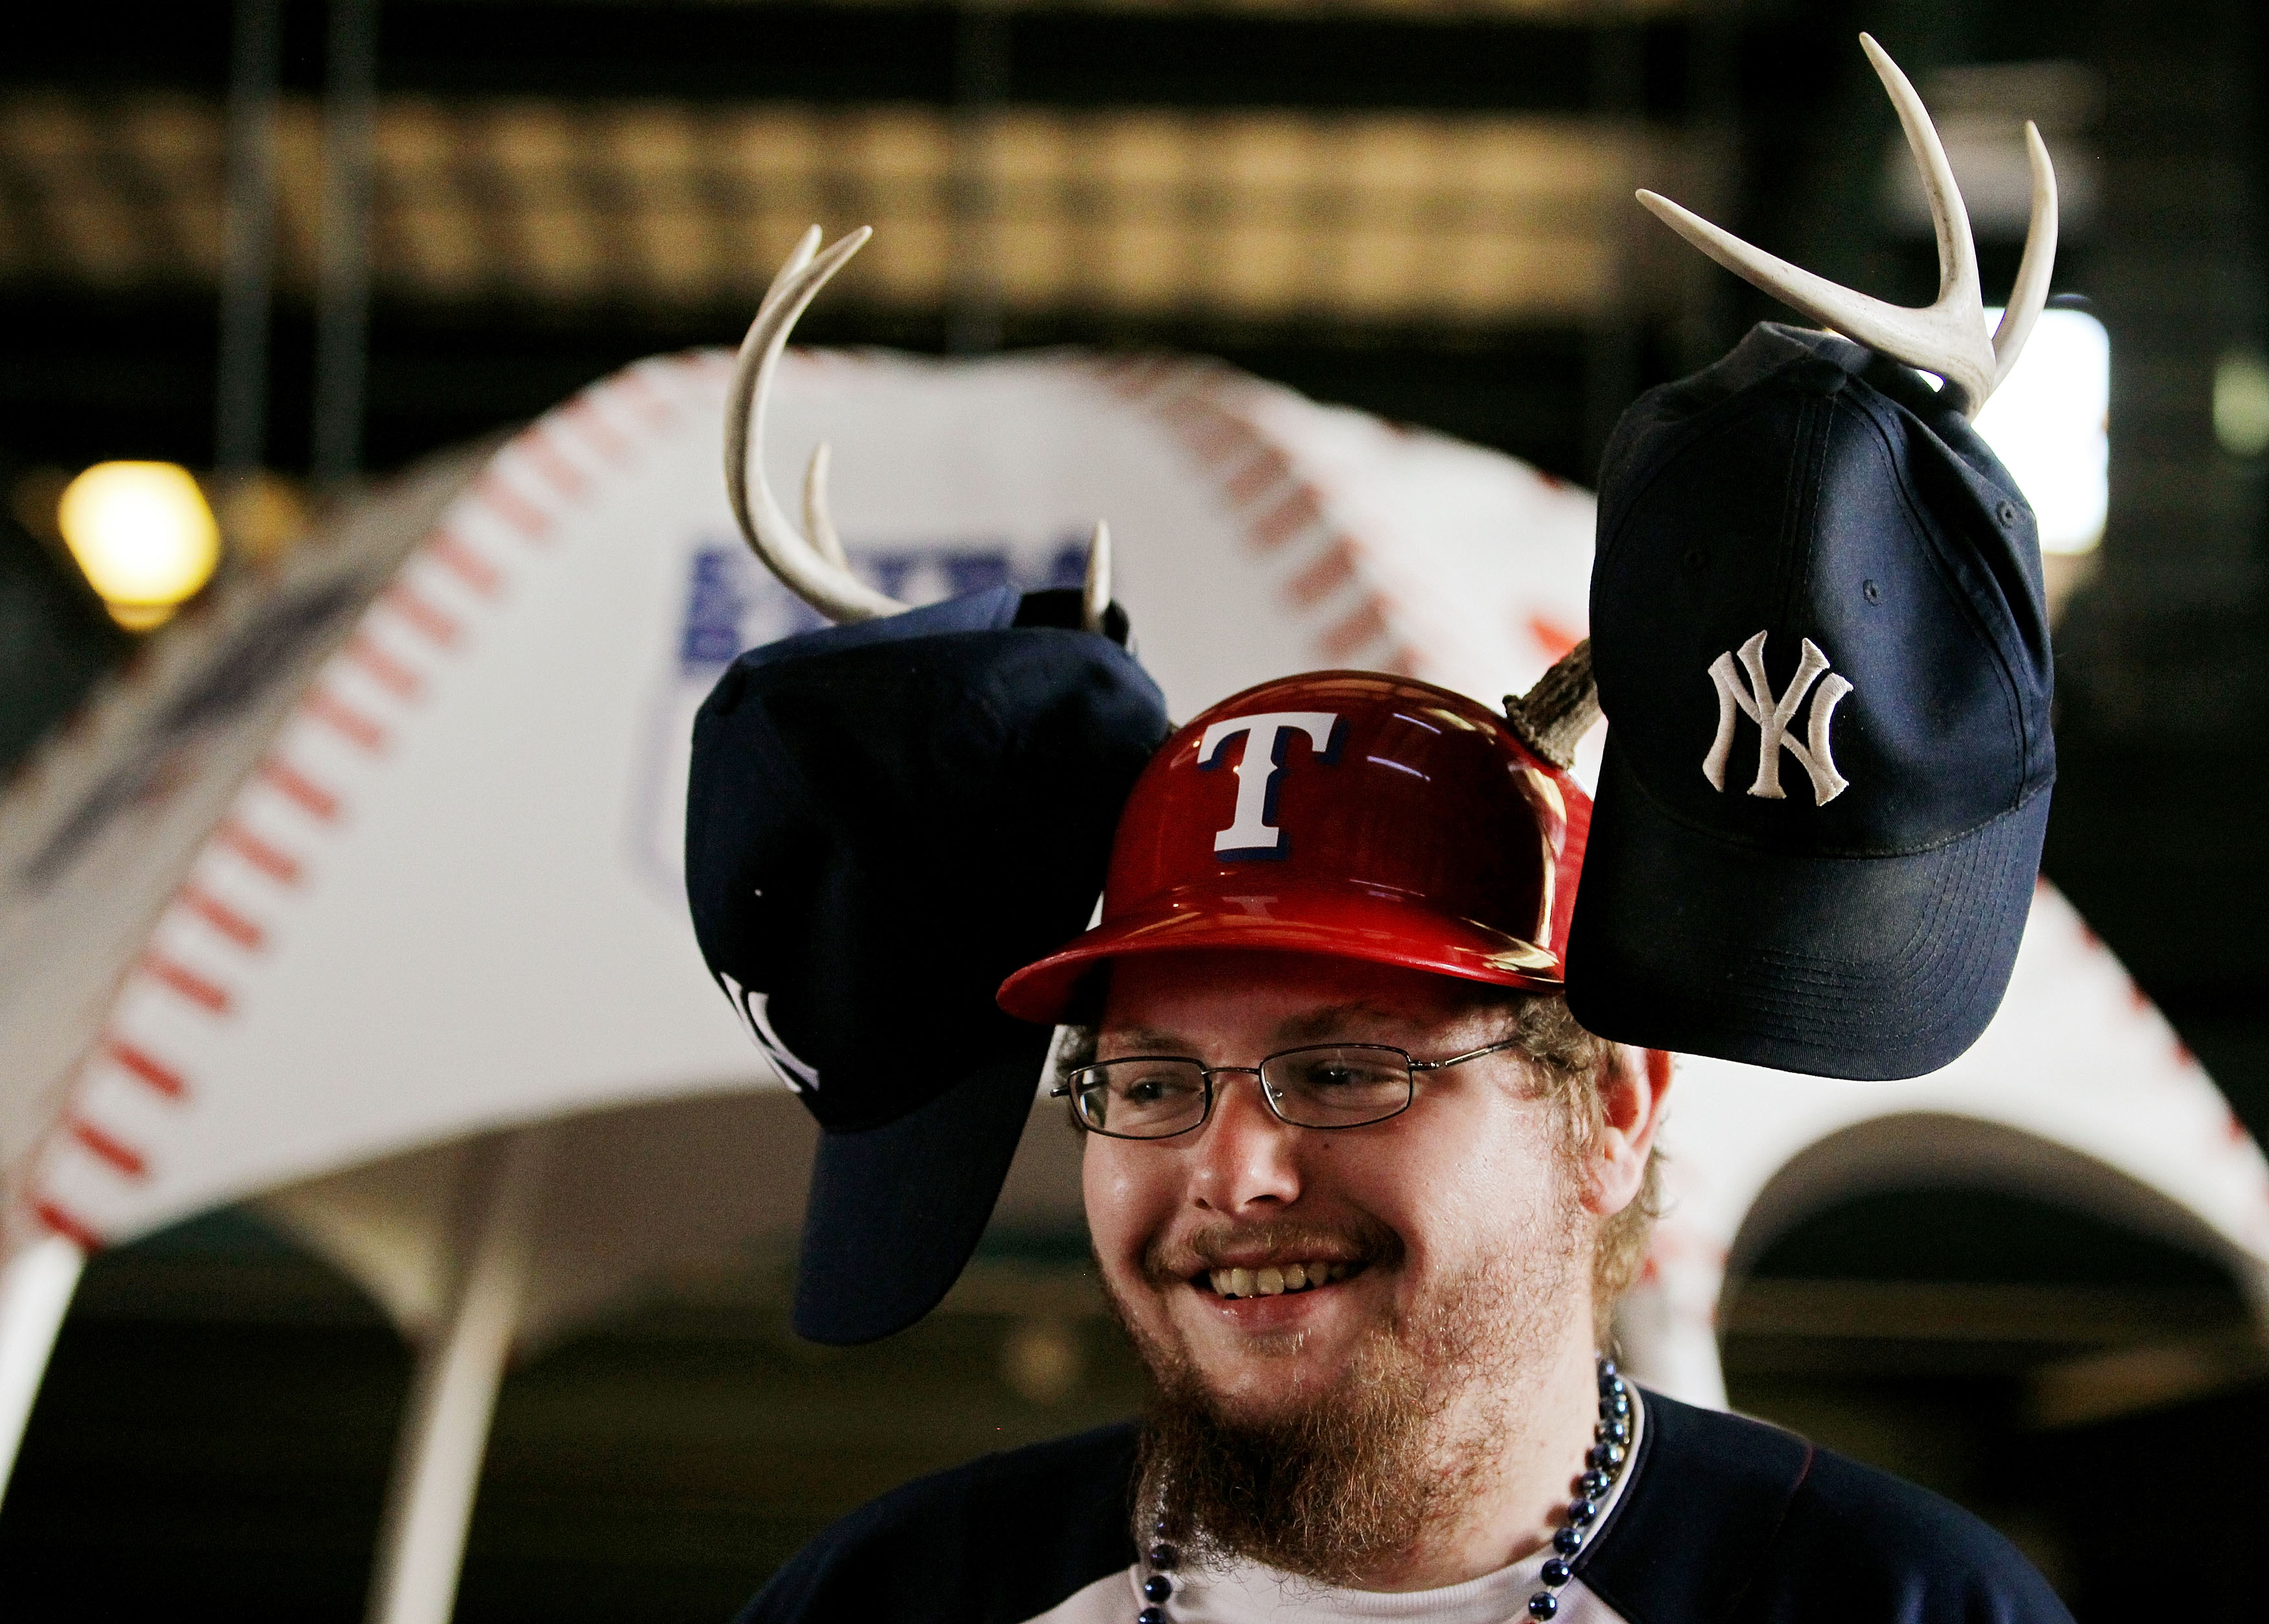 ARLINGTON, TX - OCTOBER 15:  A fan of the Texas Rangers wears a helmet with antlers on it with Yankees hats attached to it before Game One of the ALCS during the 2010 MLB Playoffs at Rangers Ballpark in Arlington on October 15, 2010 in Arlington, Texas.